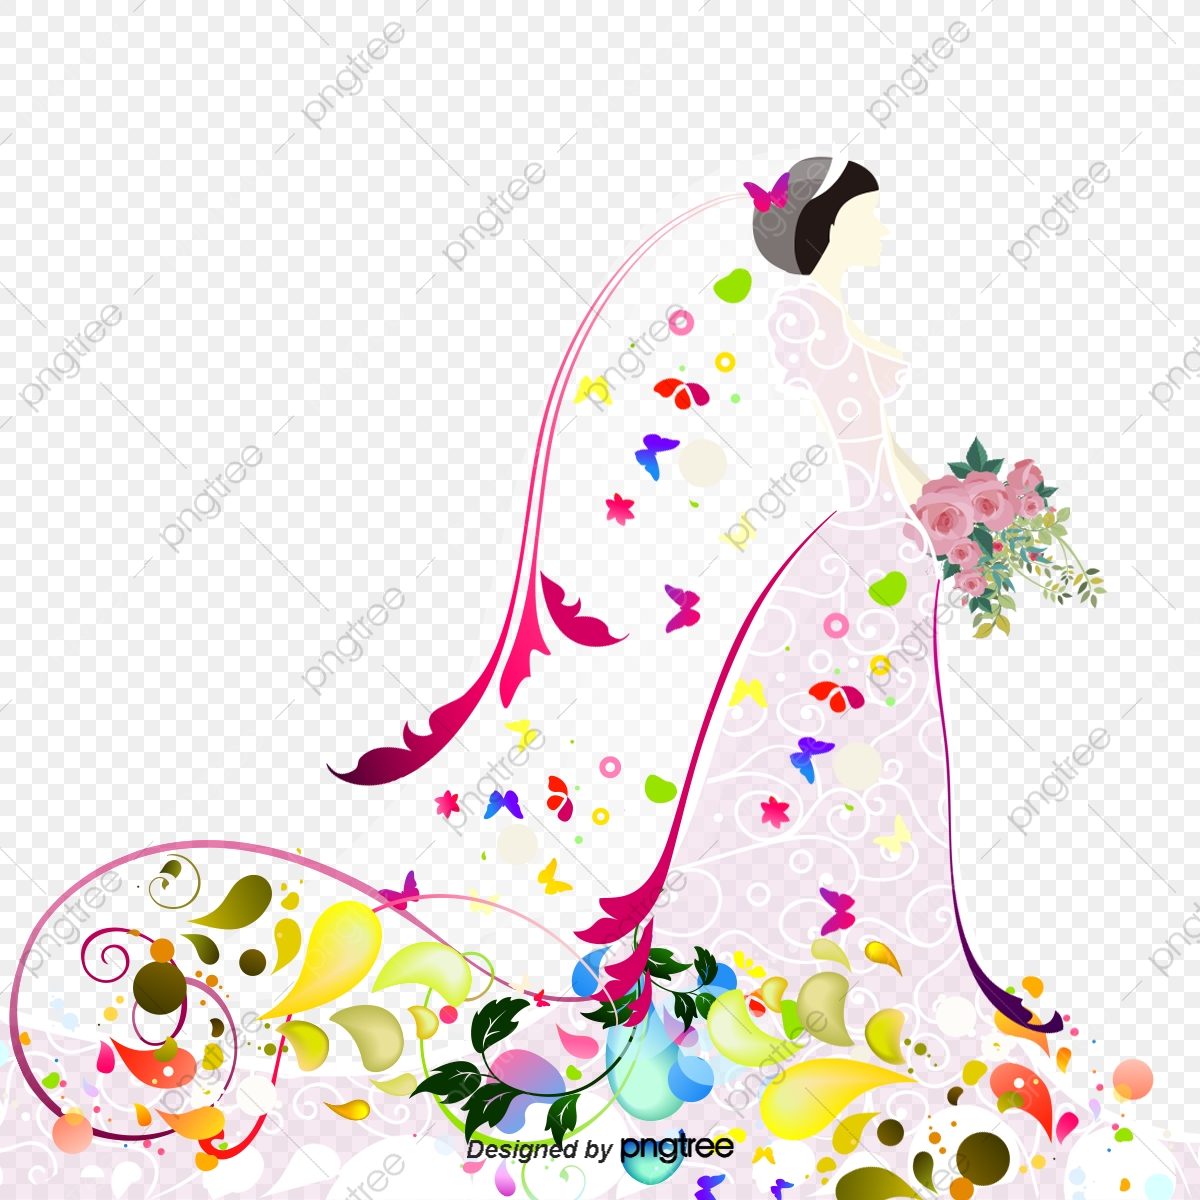 5,872 Wedding party vector images at Vectorified.com